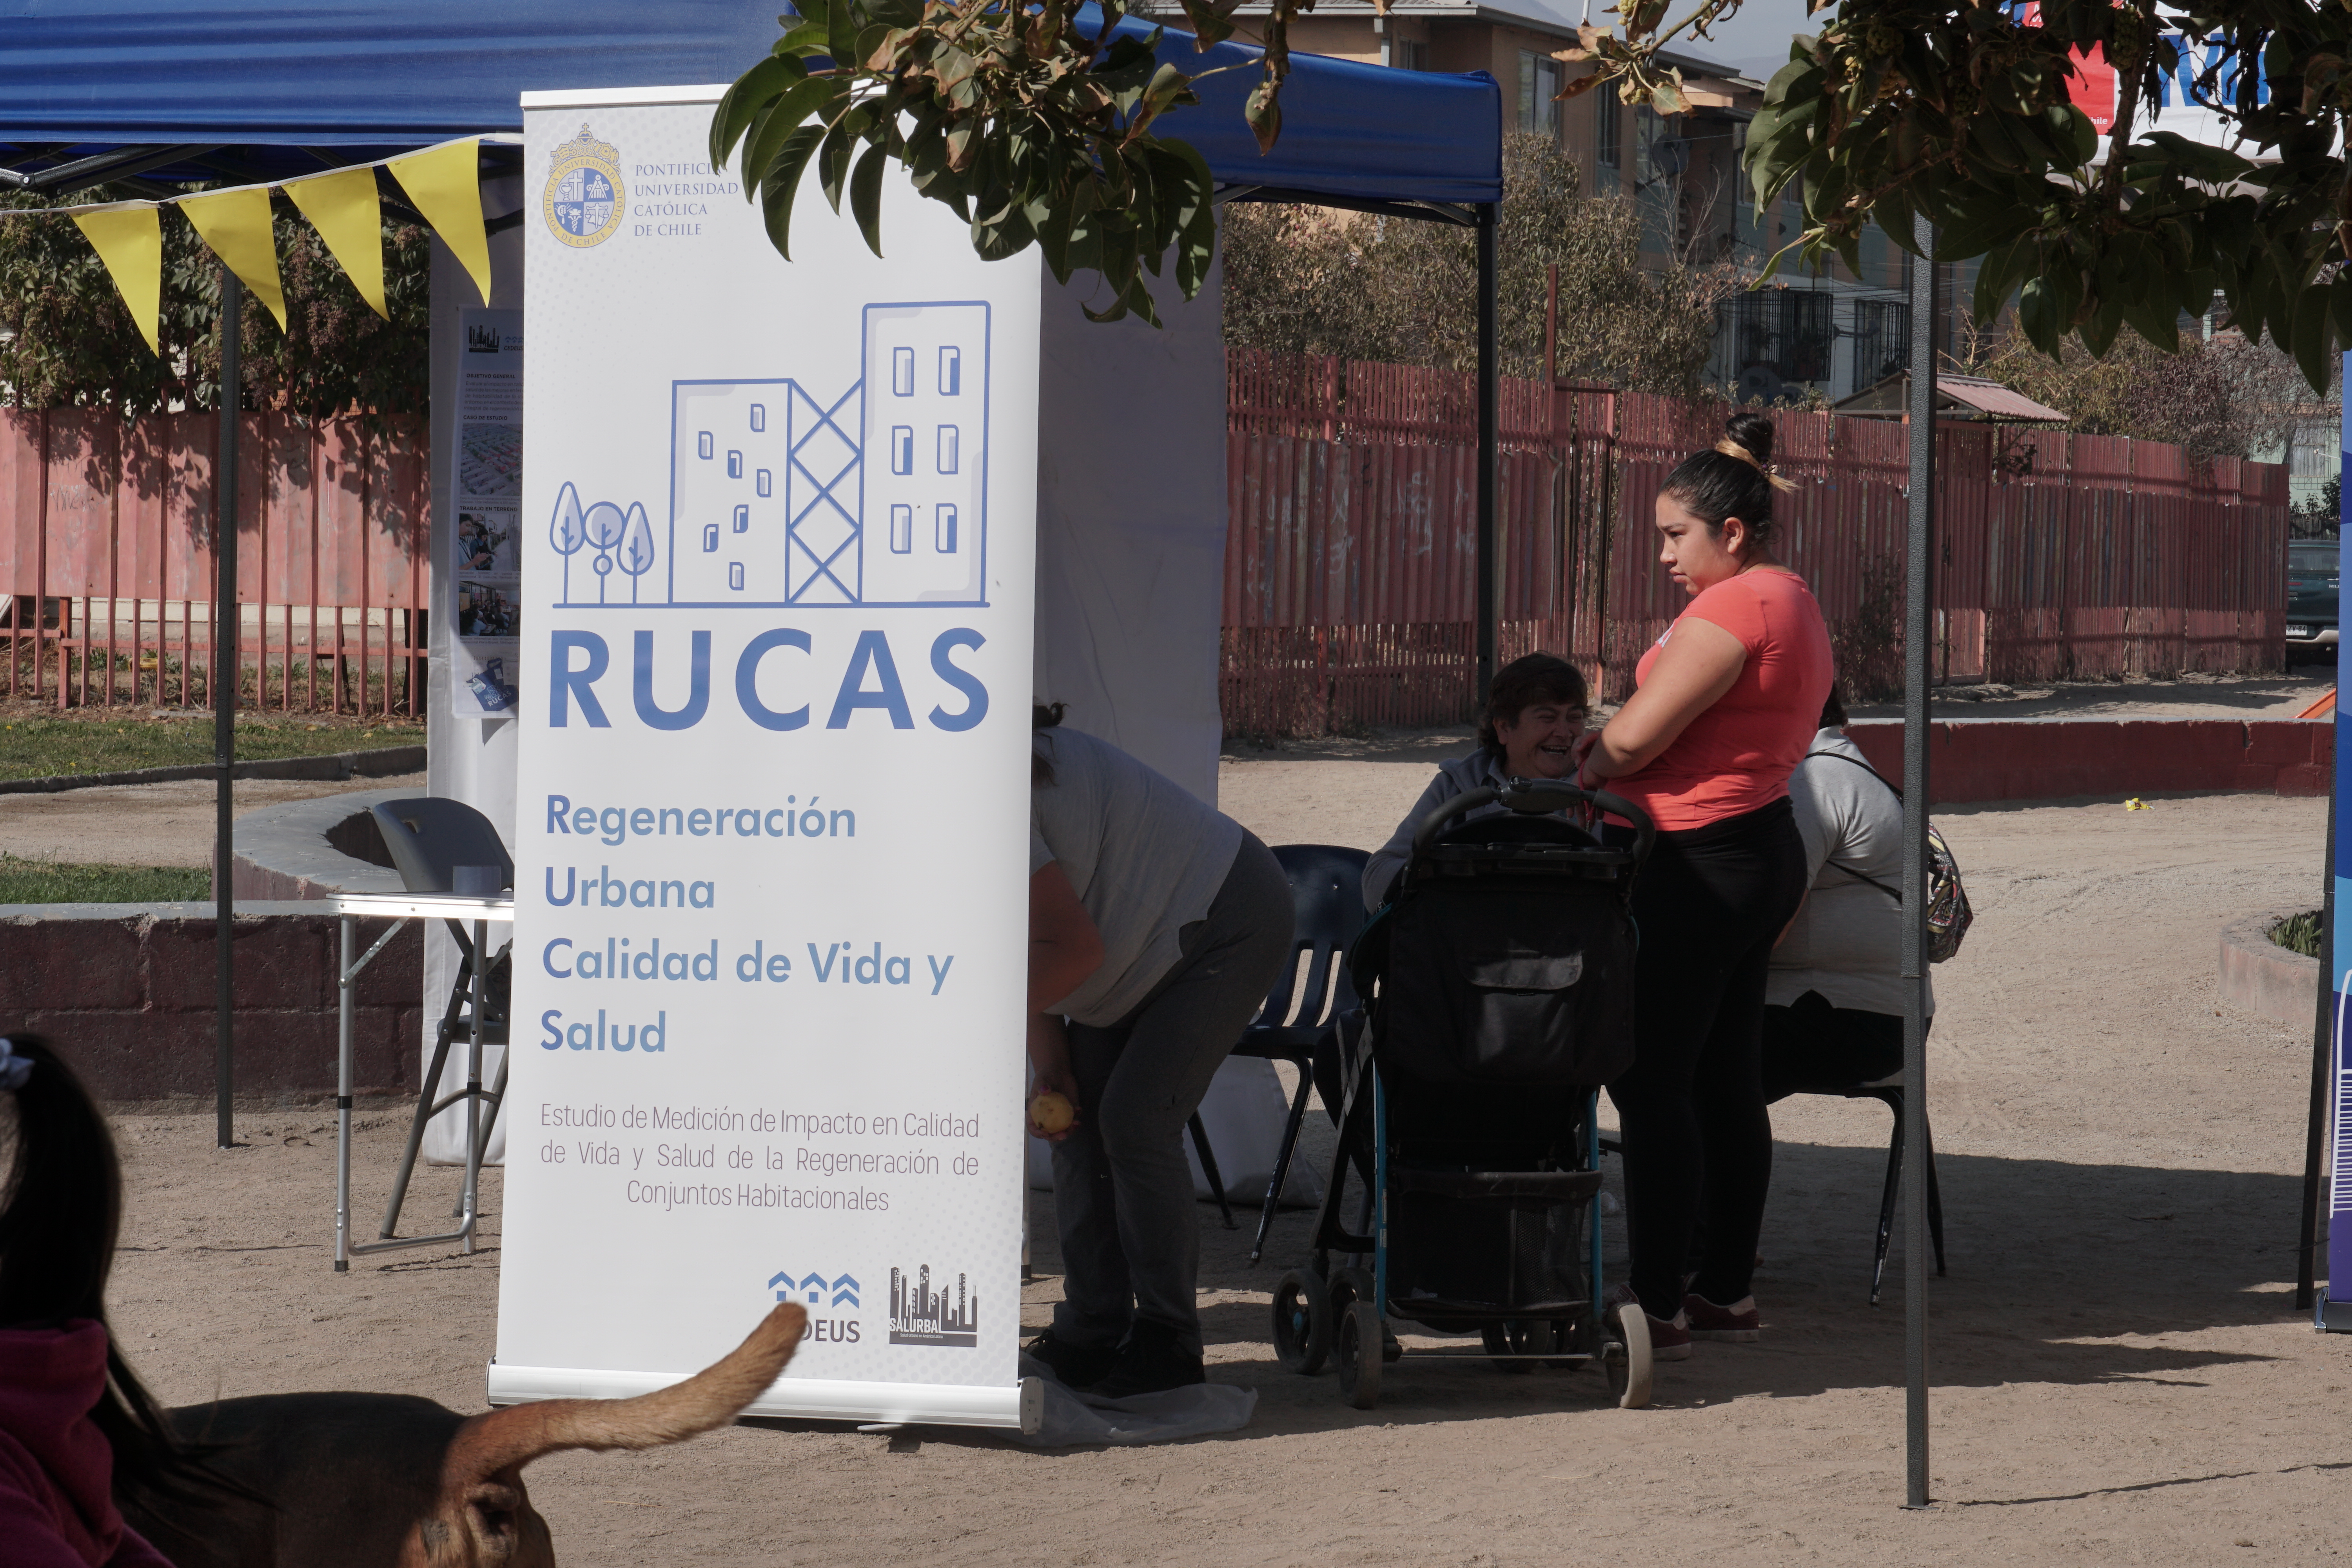 RUCAS booth in a Chilean neighborhood